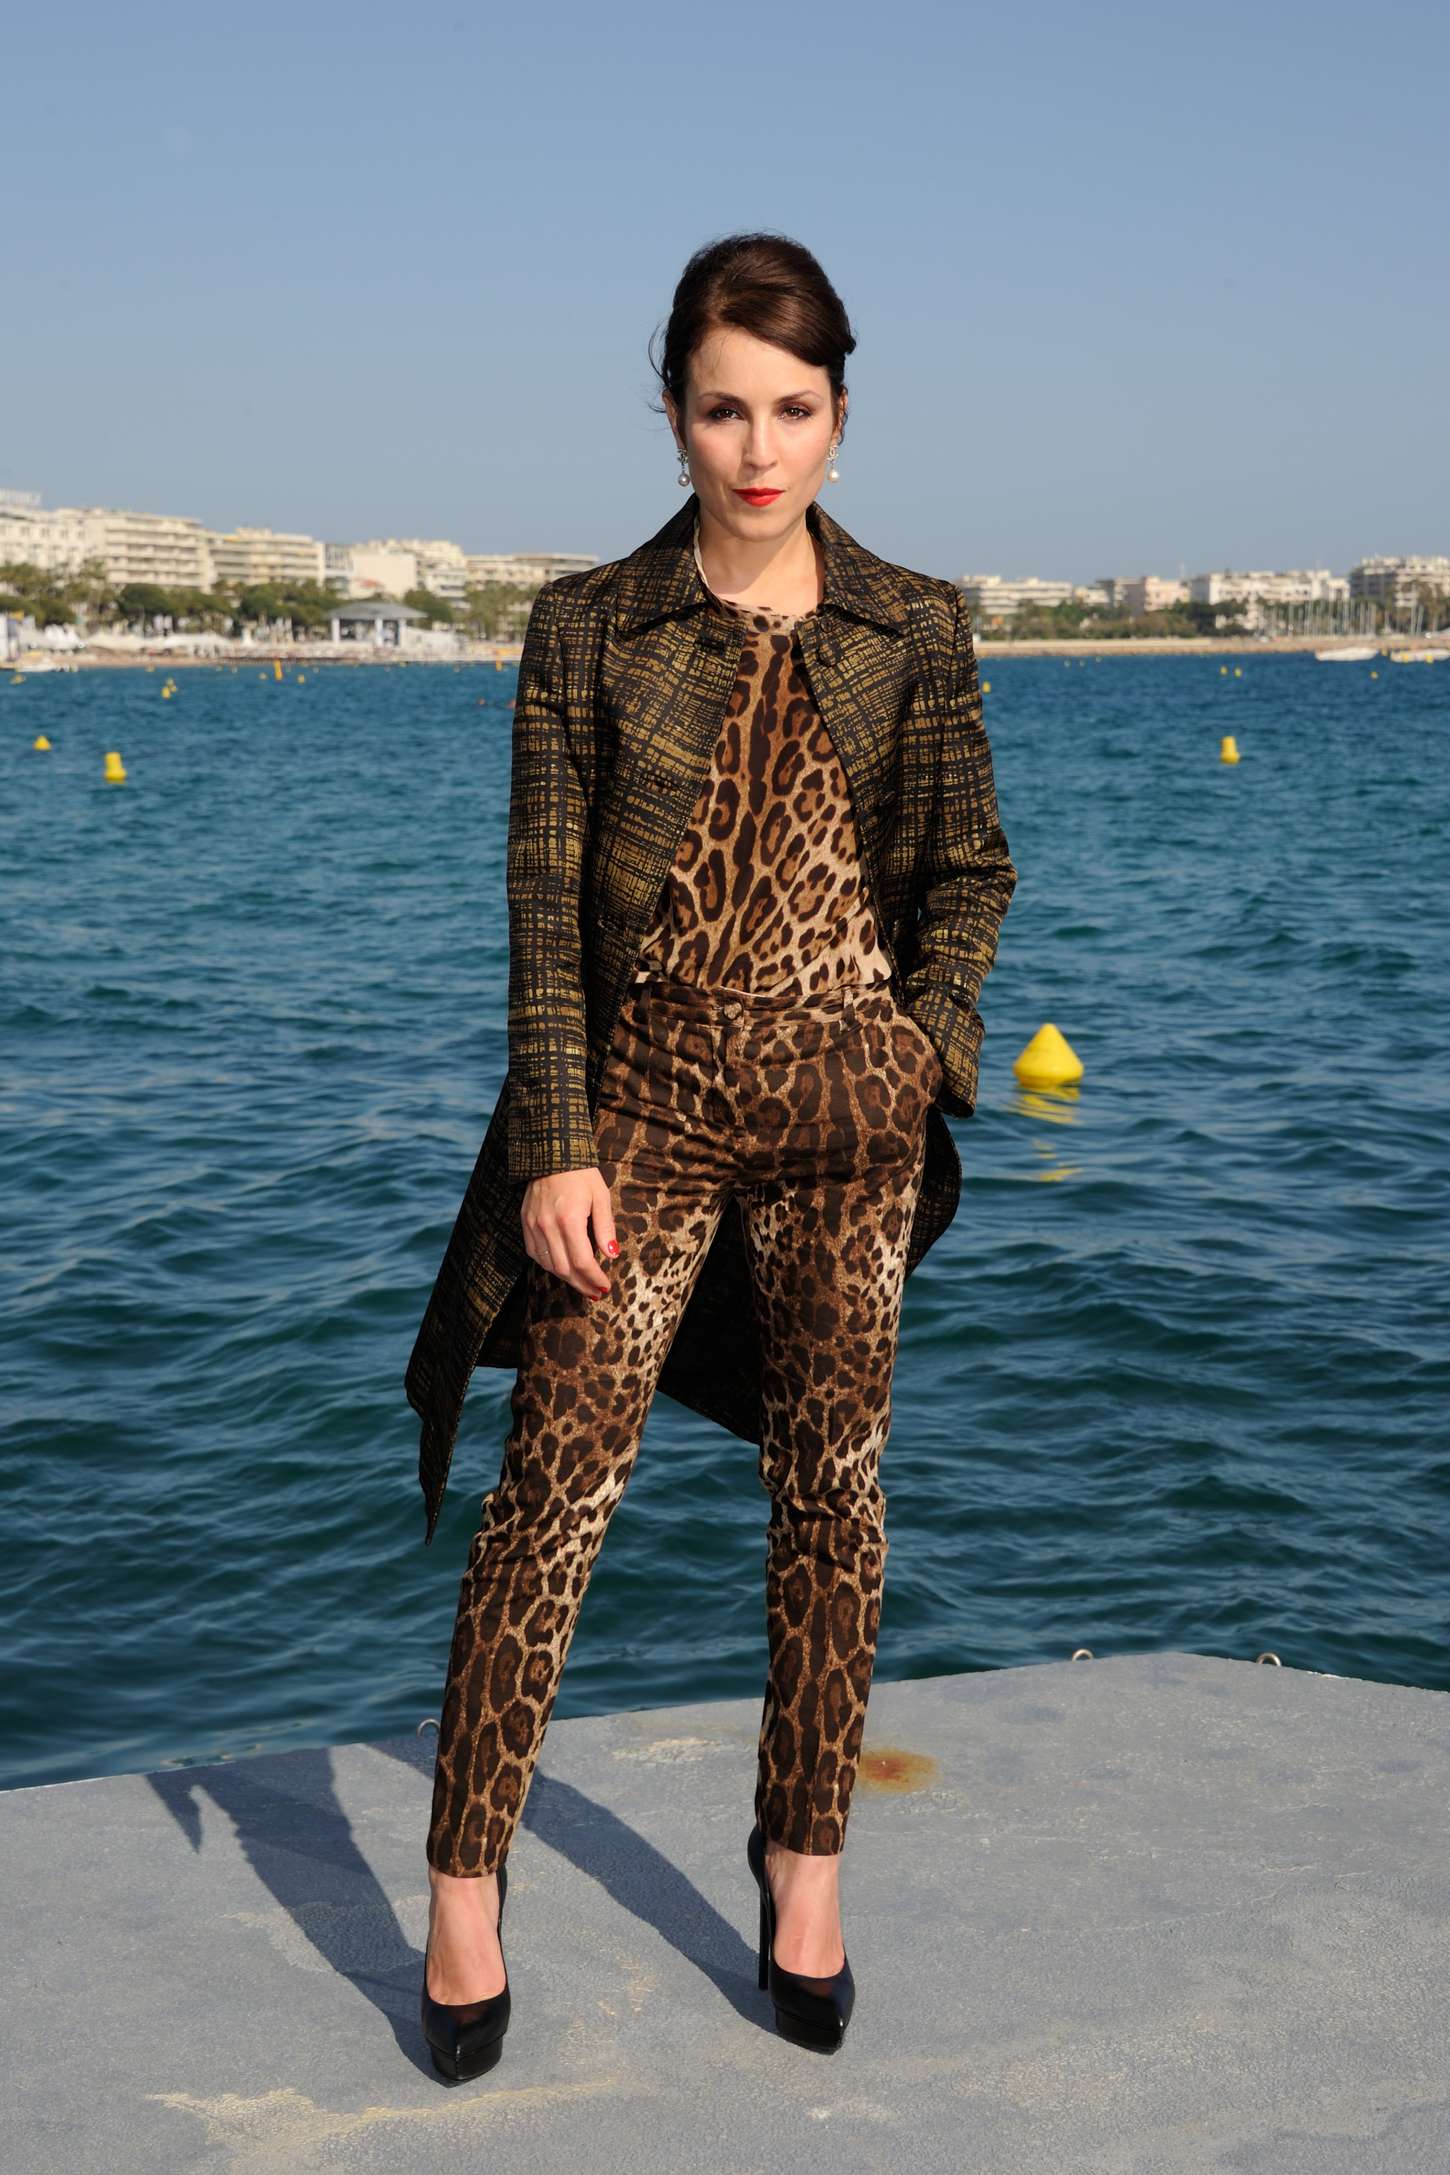 Noomi Rapace - "Callas" Photocall at The 68th Annual Cannes Film Festival